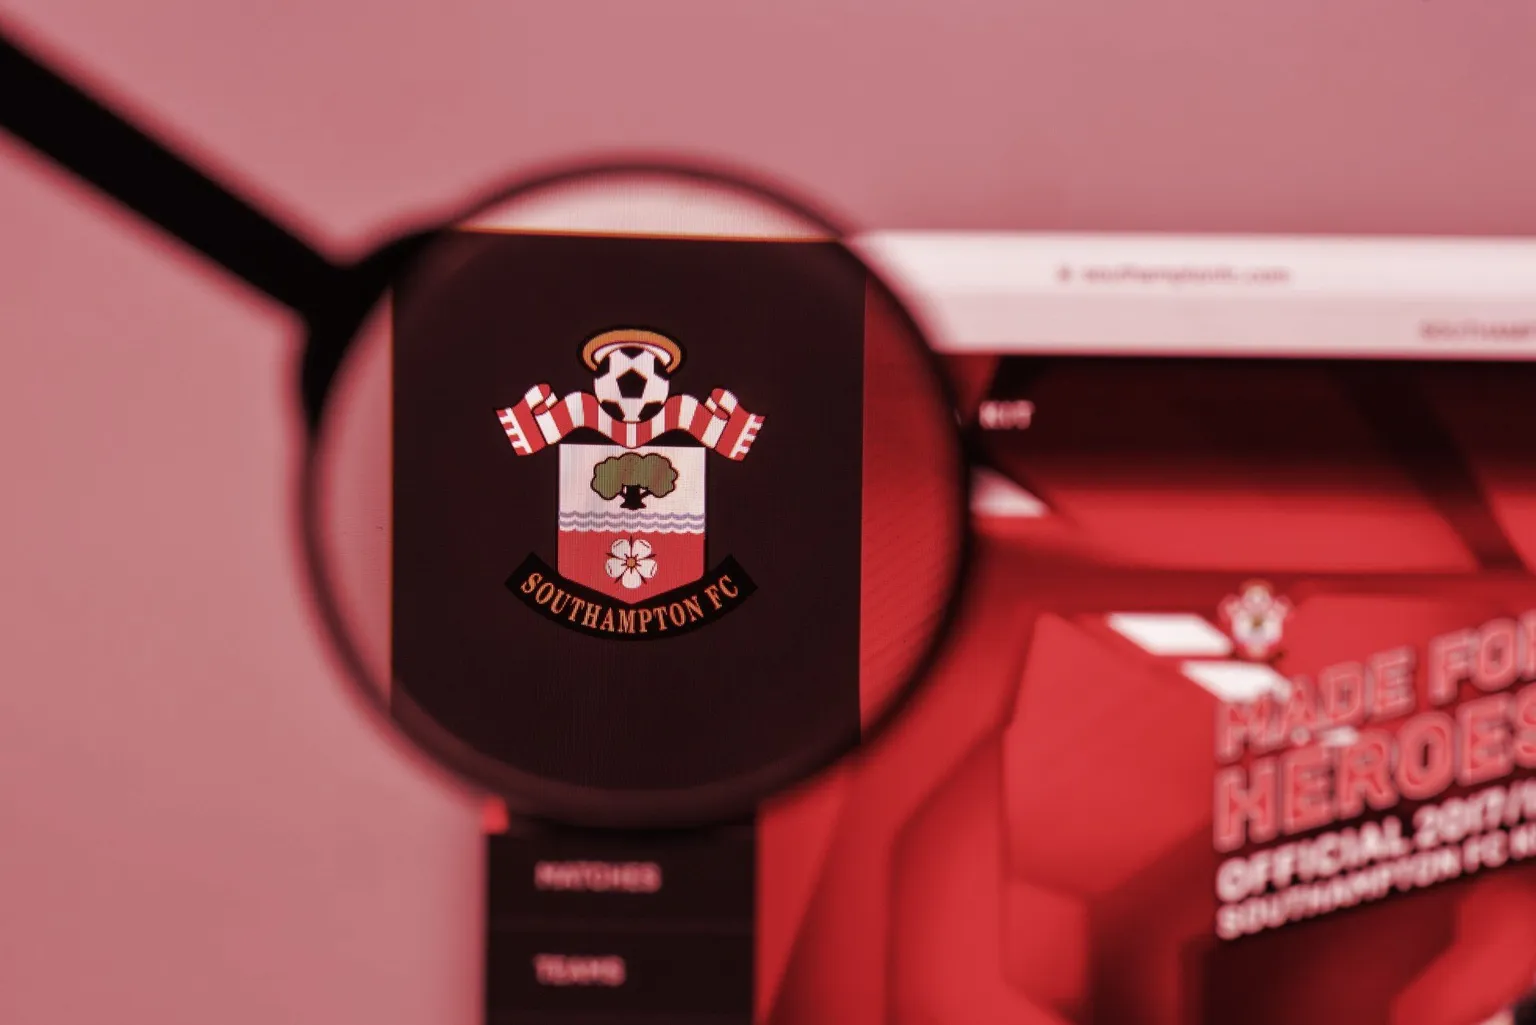 Southampton FC deal could see performance bonuses paid in Bitcoin. Image: Shutterstock